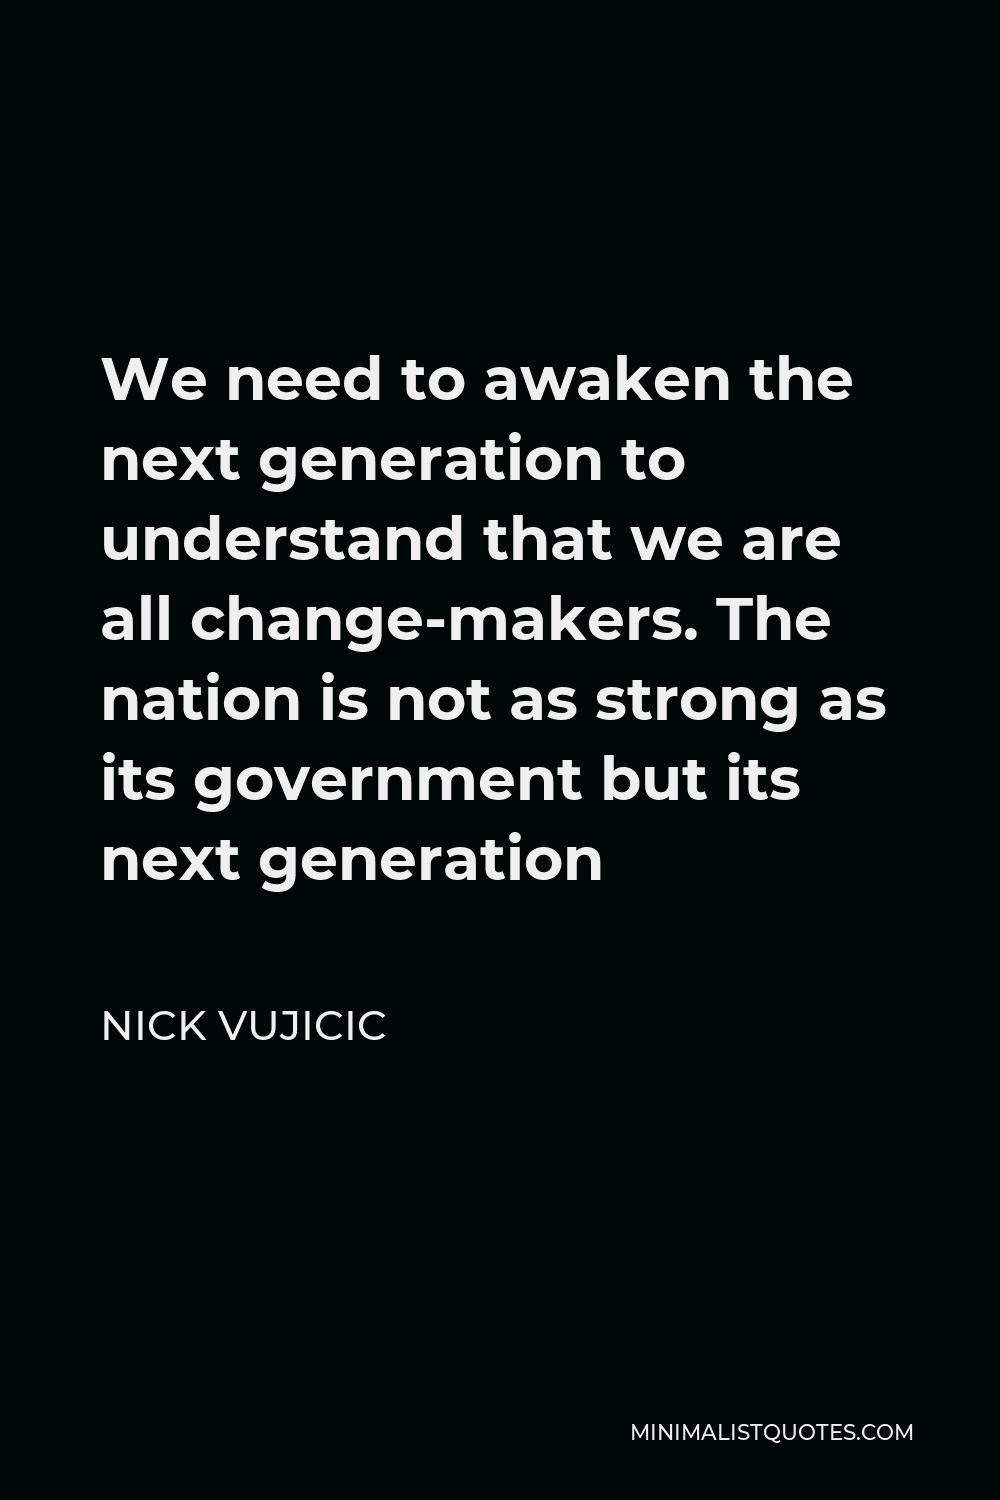 Nick Vujicic Quote - We need to awaken the next generation to understand that we are all change-makers. The nation is not as strong as its government but its next generation